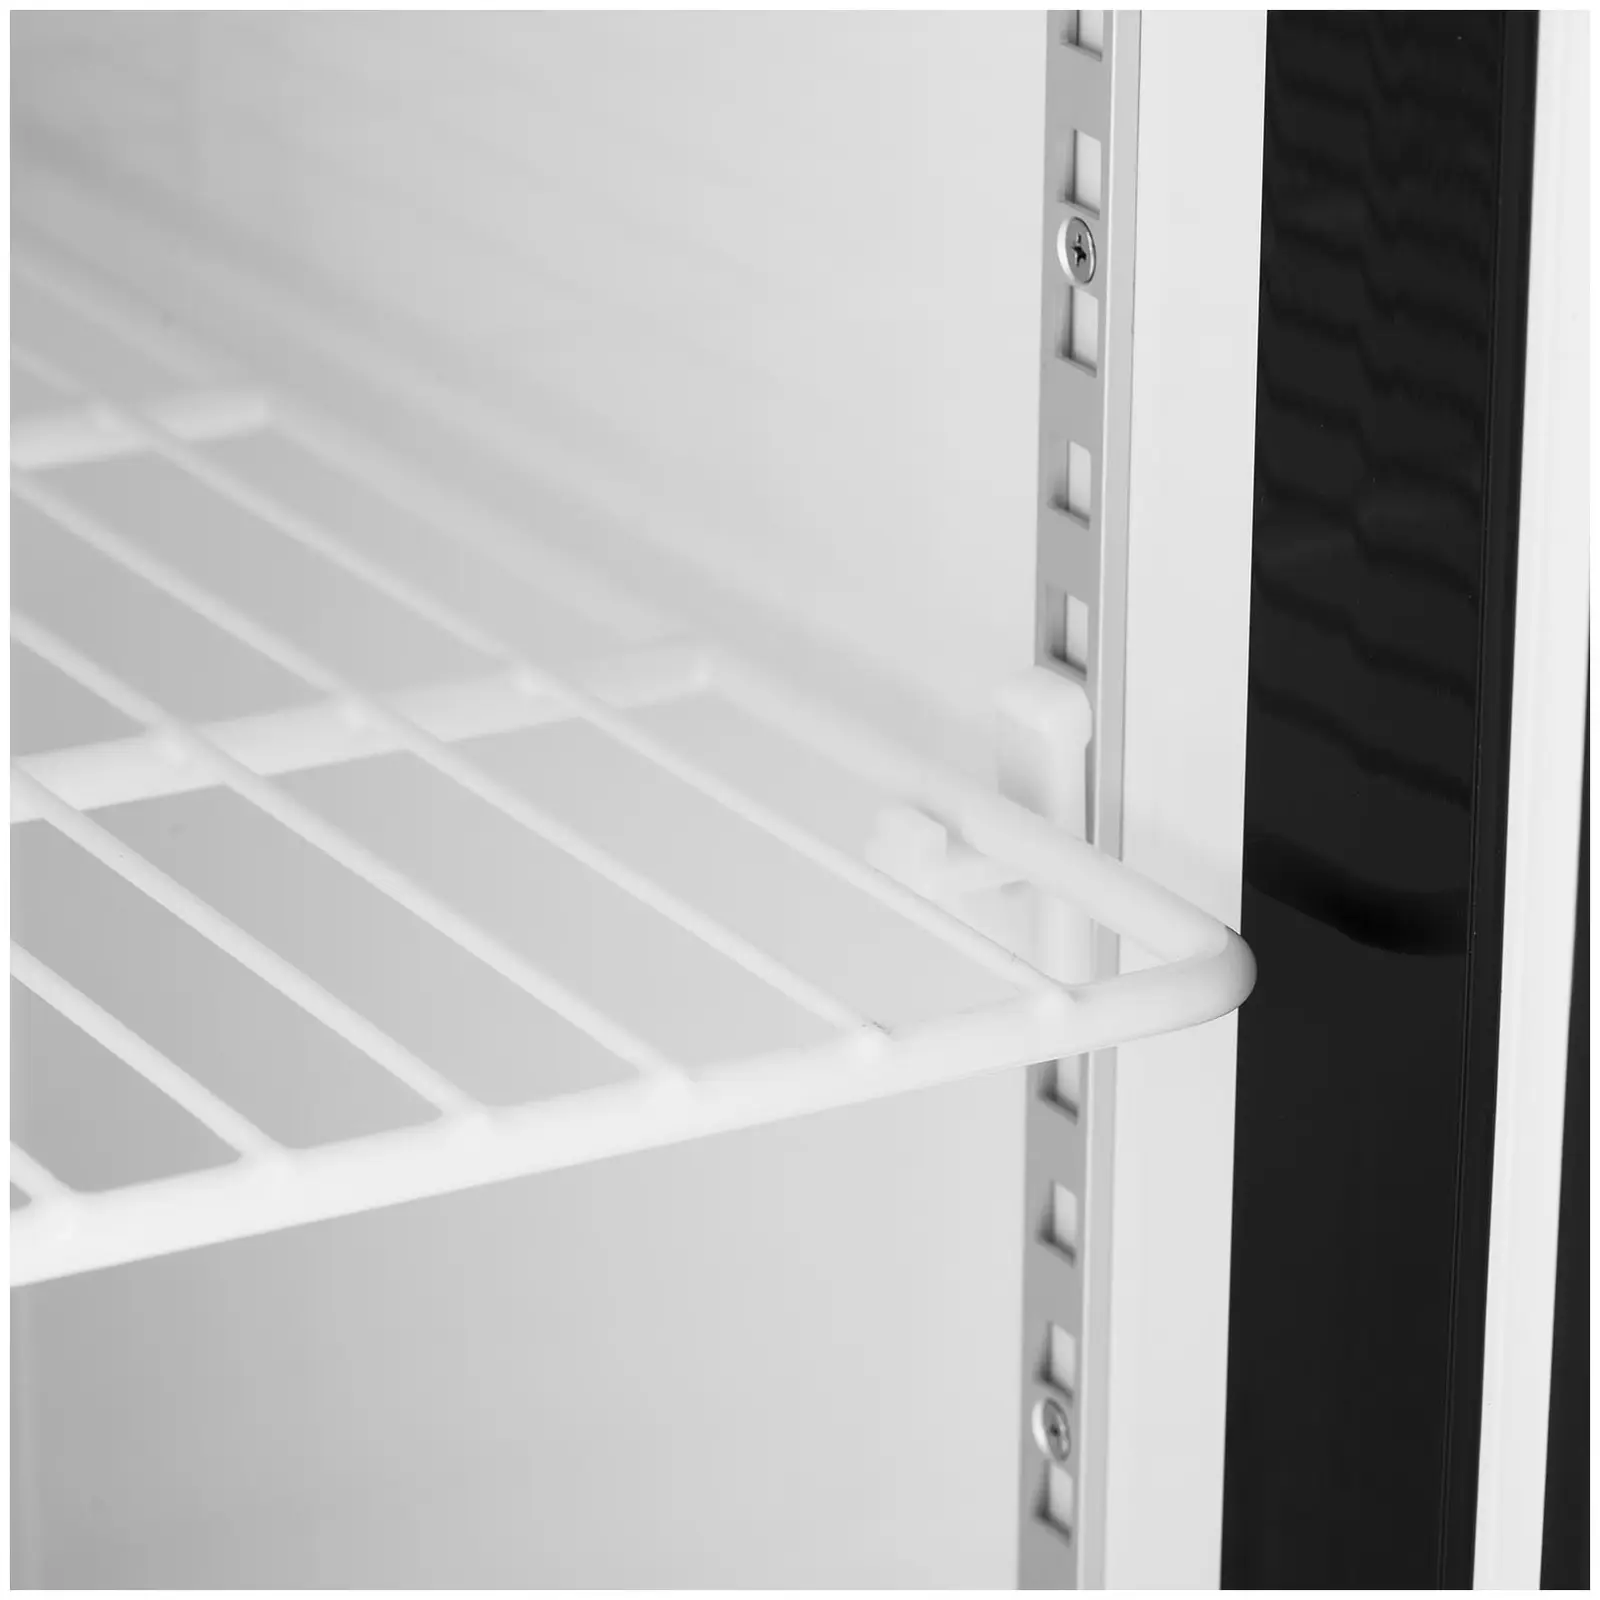 Factory second Refrigerator - 590 L - Royal Catering